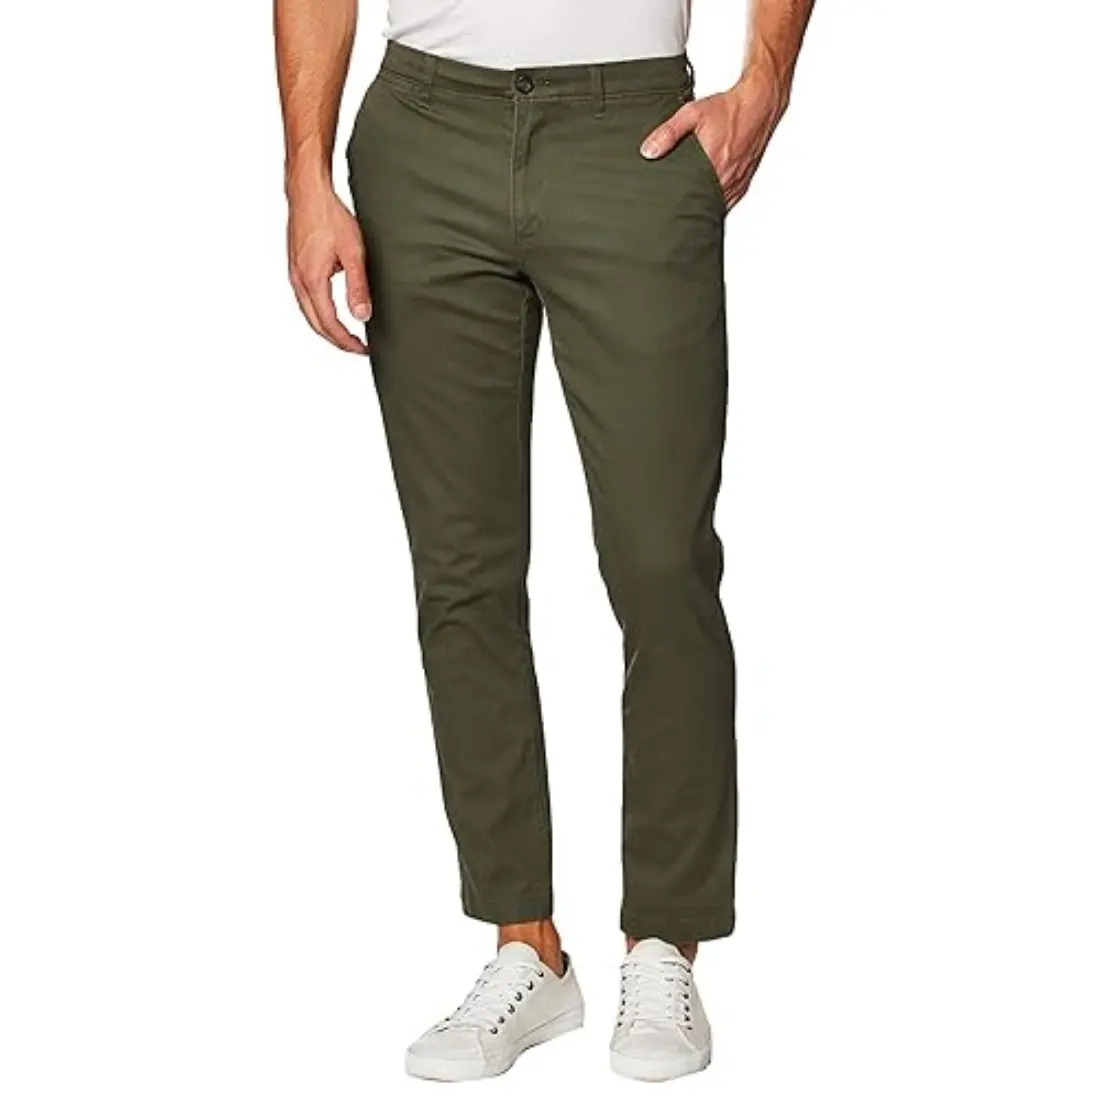 Buy Olive Green Popular Various Mid Waist Comfortable Men Casual Dress Pants Custom High Quality Chinos